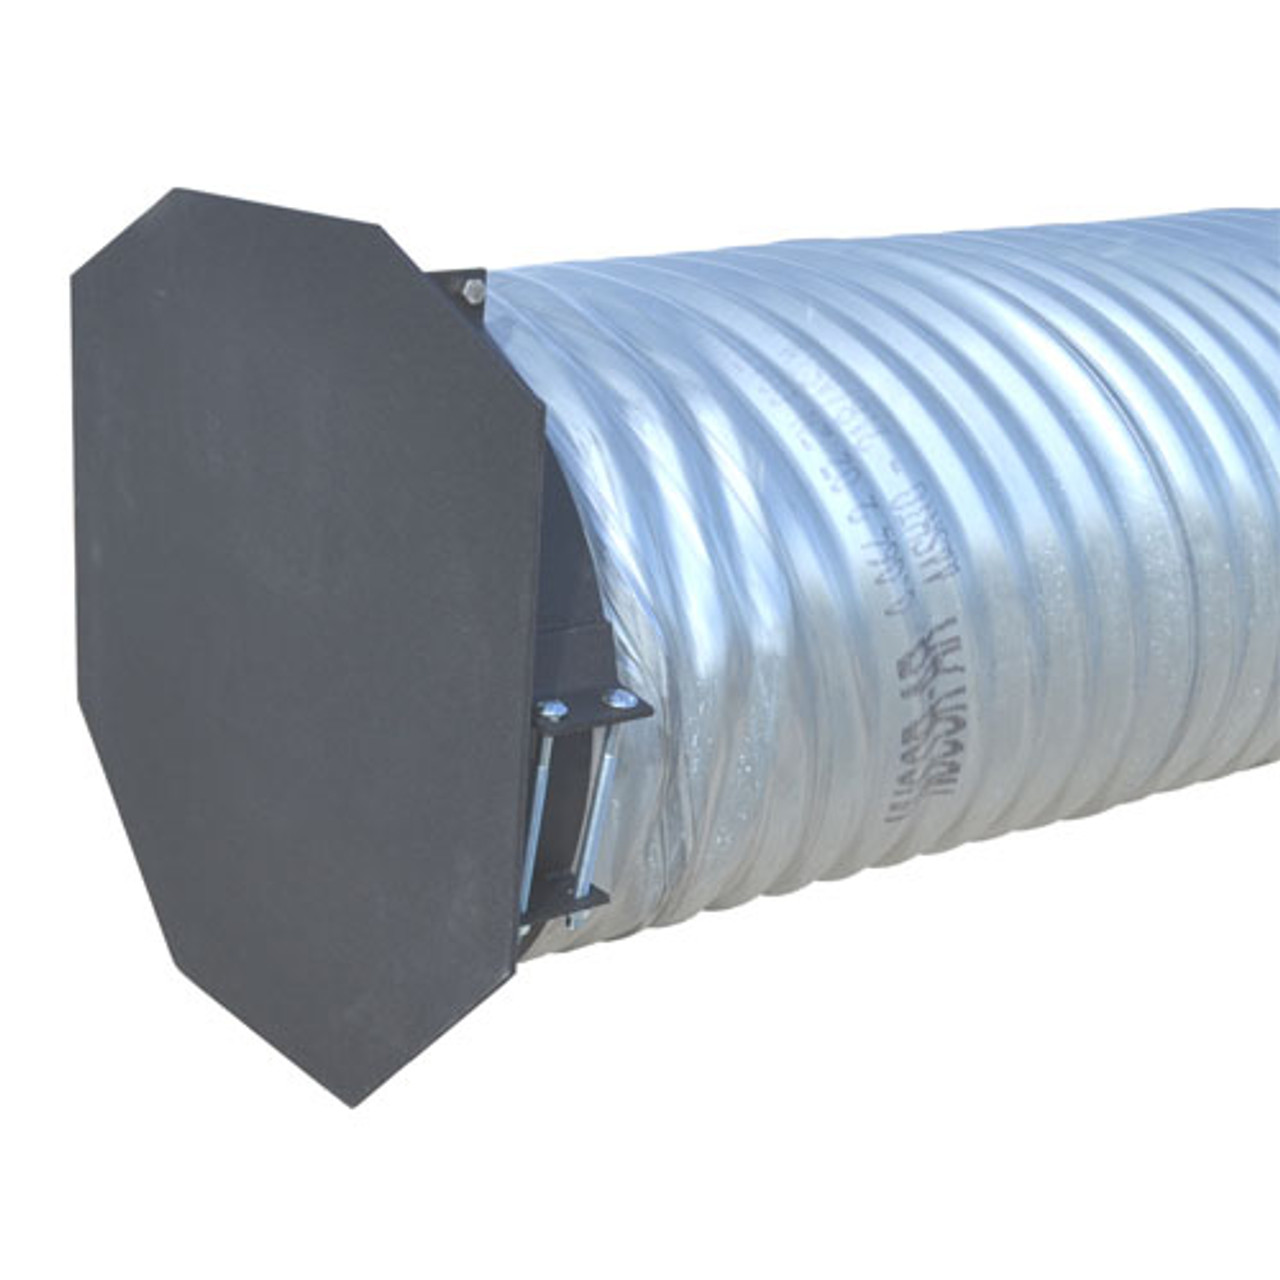 Flap Gate 24" Heavy Duty The Drainage Products Store